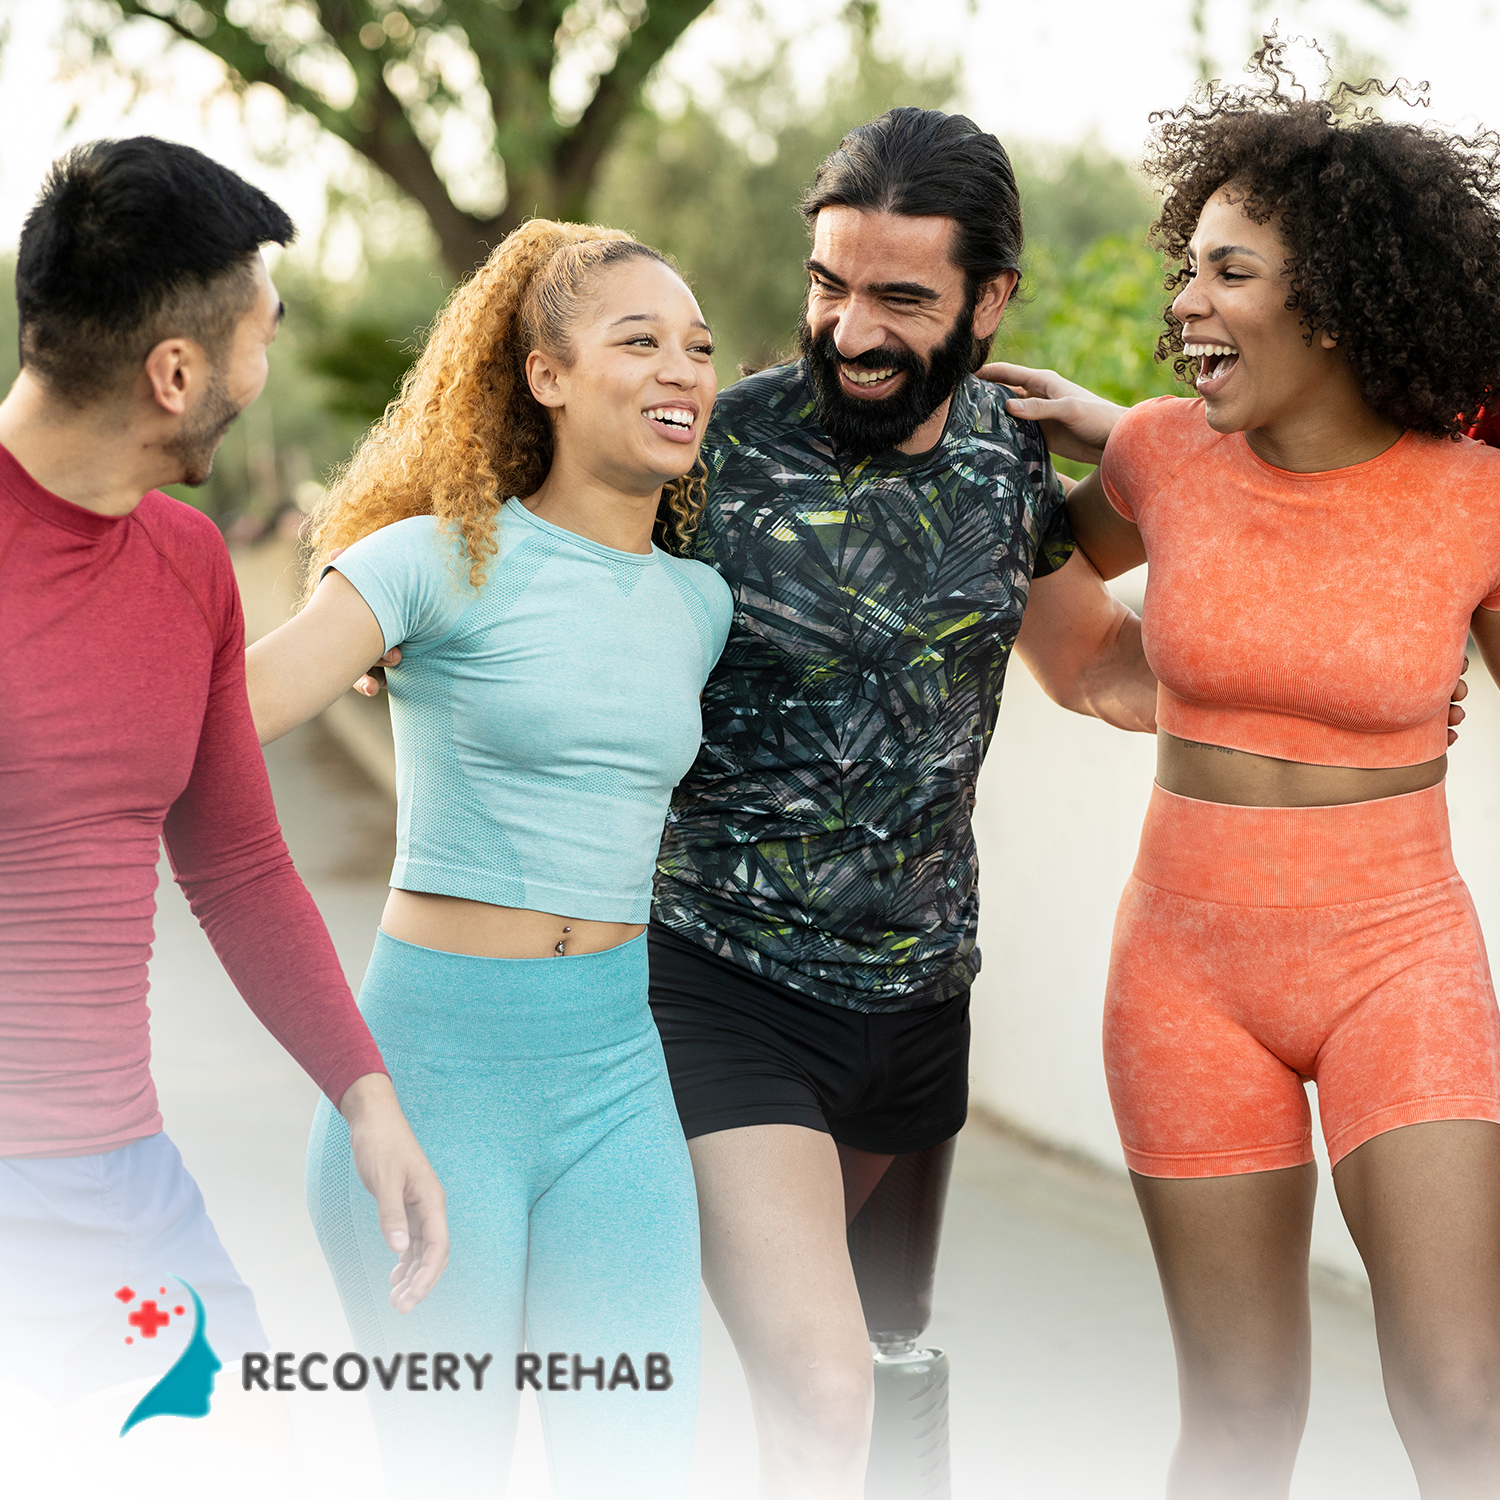 Introducing Recovery Rehab: The source for Alcohol and Drug Rehab